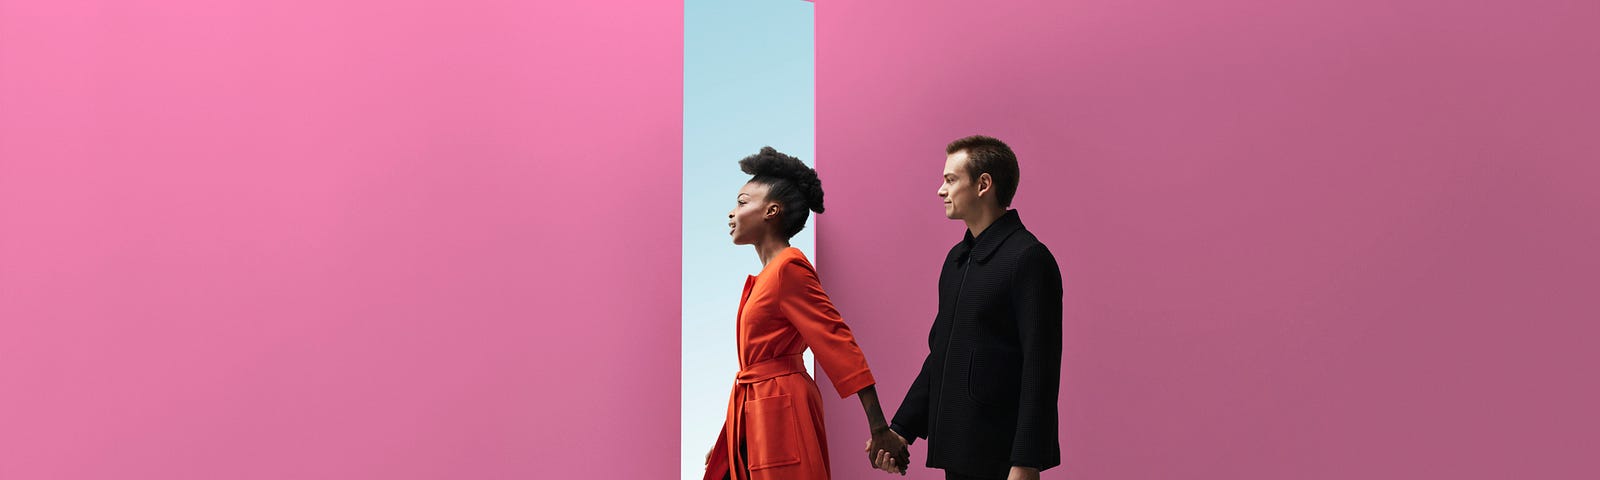 Interracial couple walking through a door in a pink wall, holding hands.